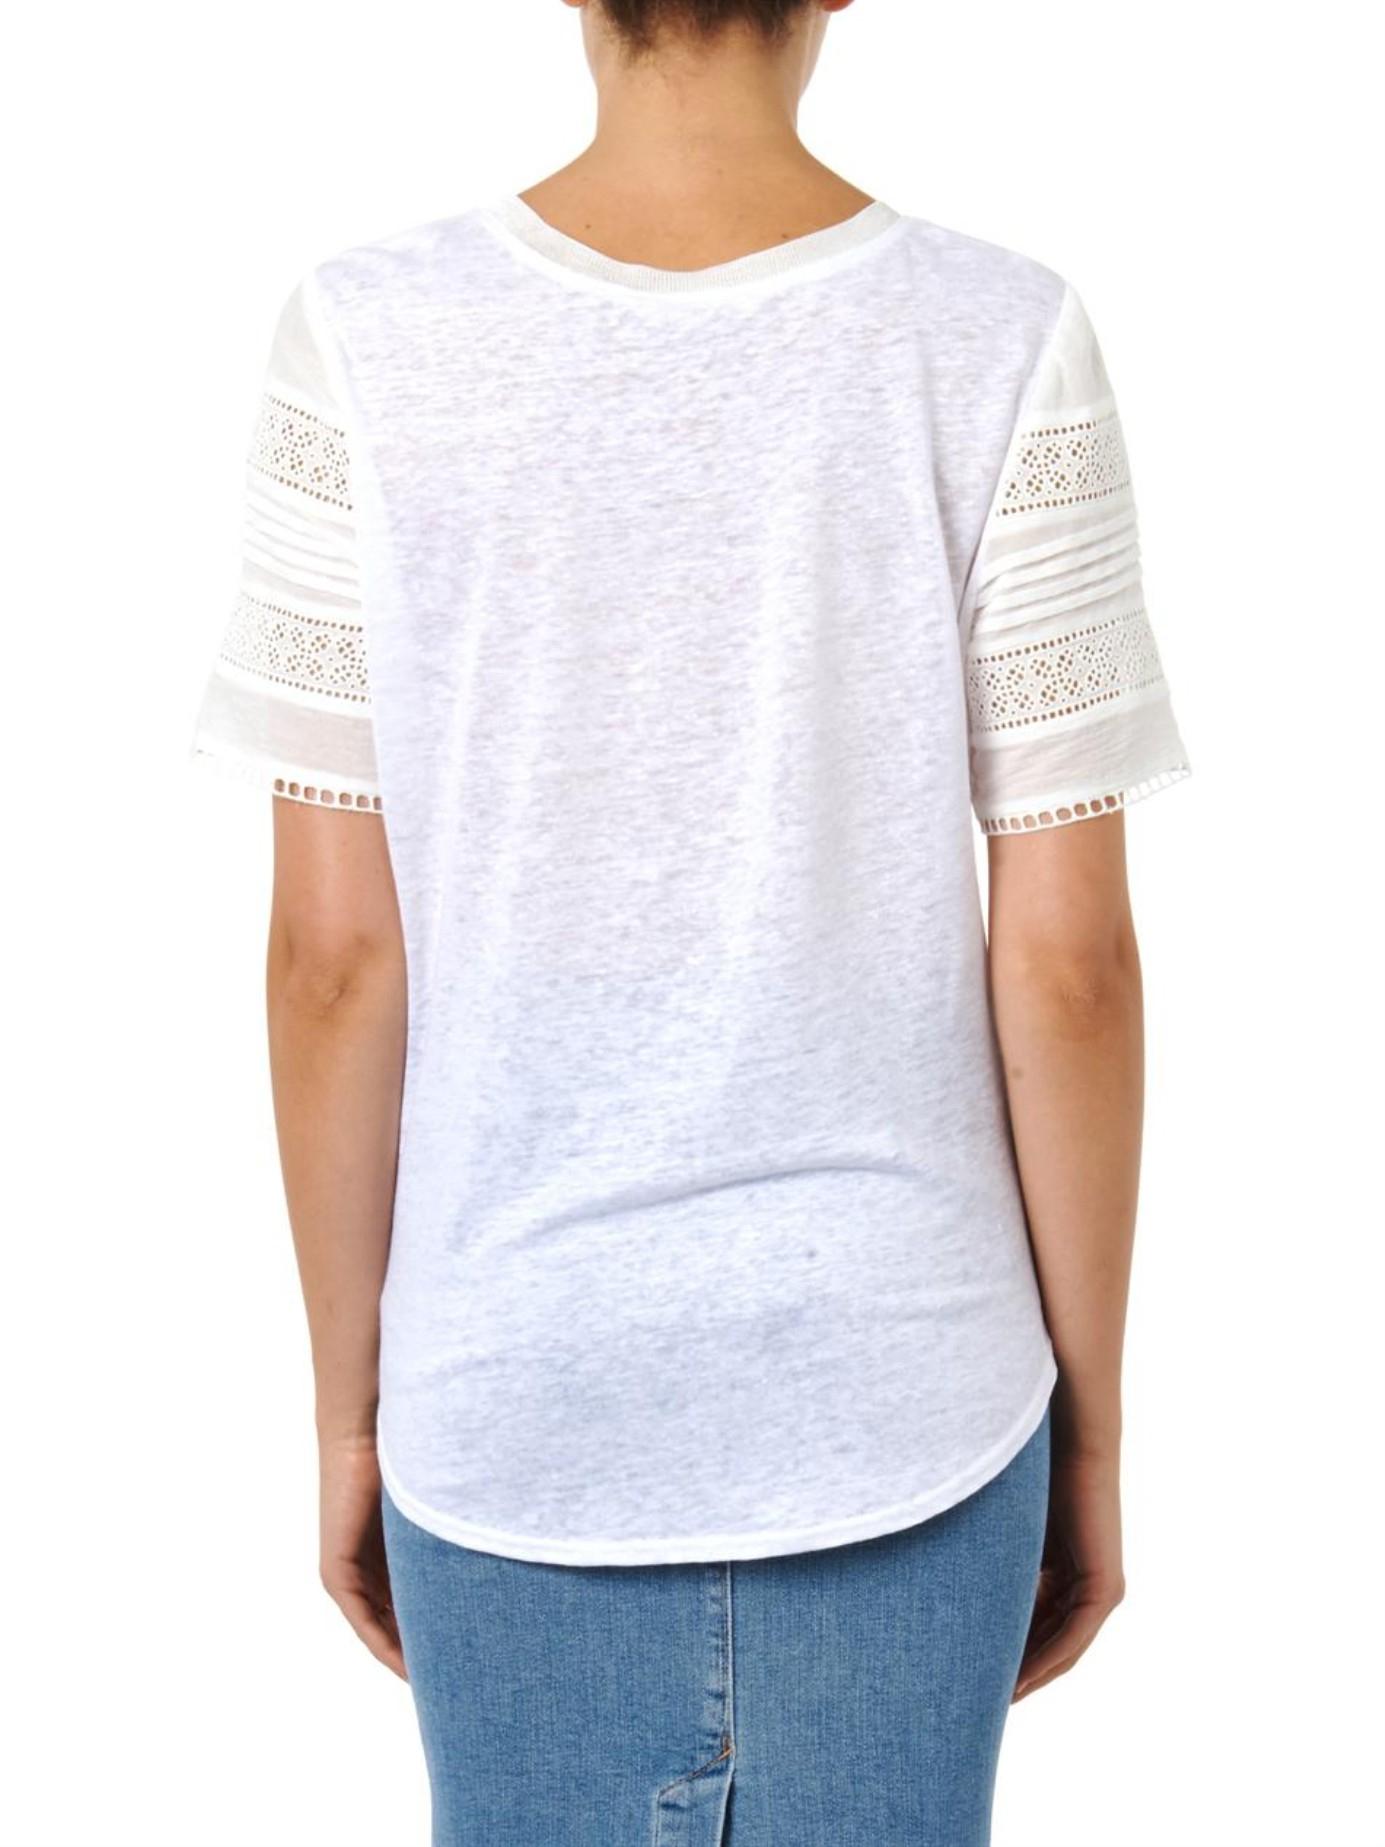 Rebecca Taylor Novelty Broderie-anglaise T-shirt in White - Lyst